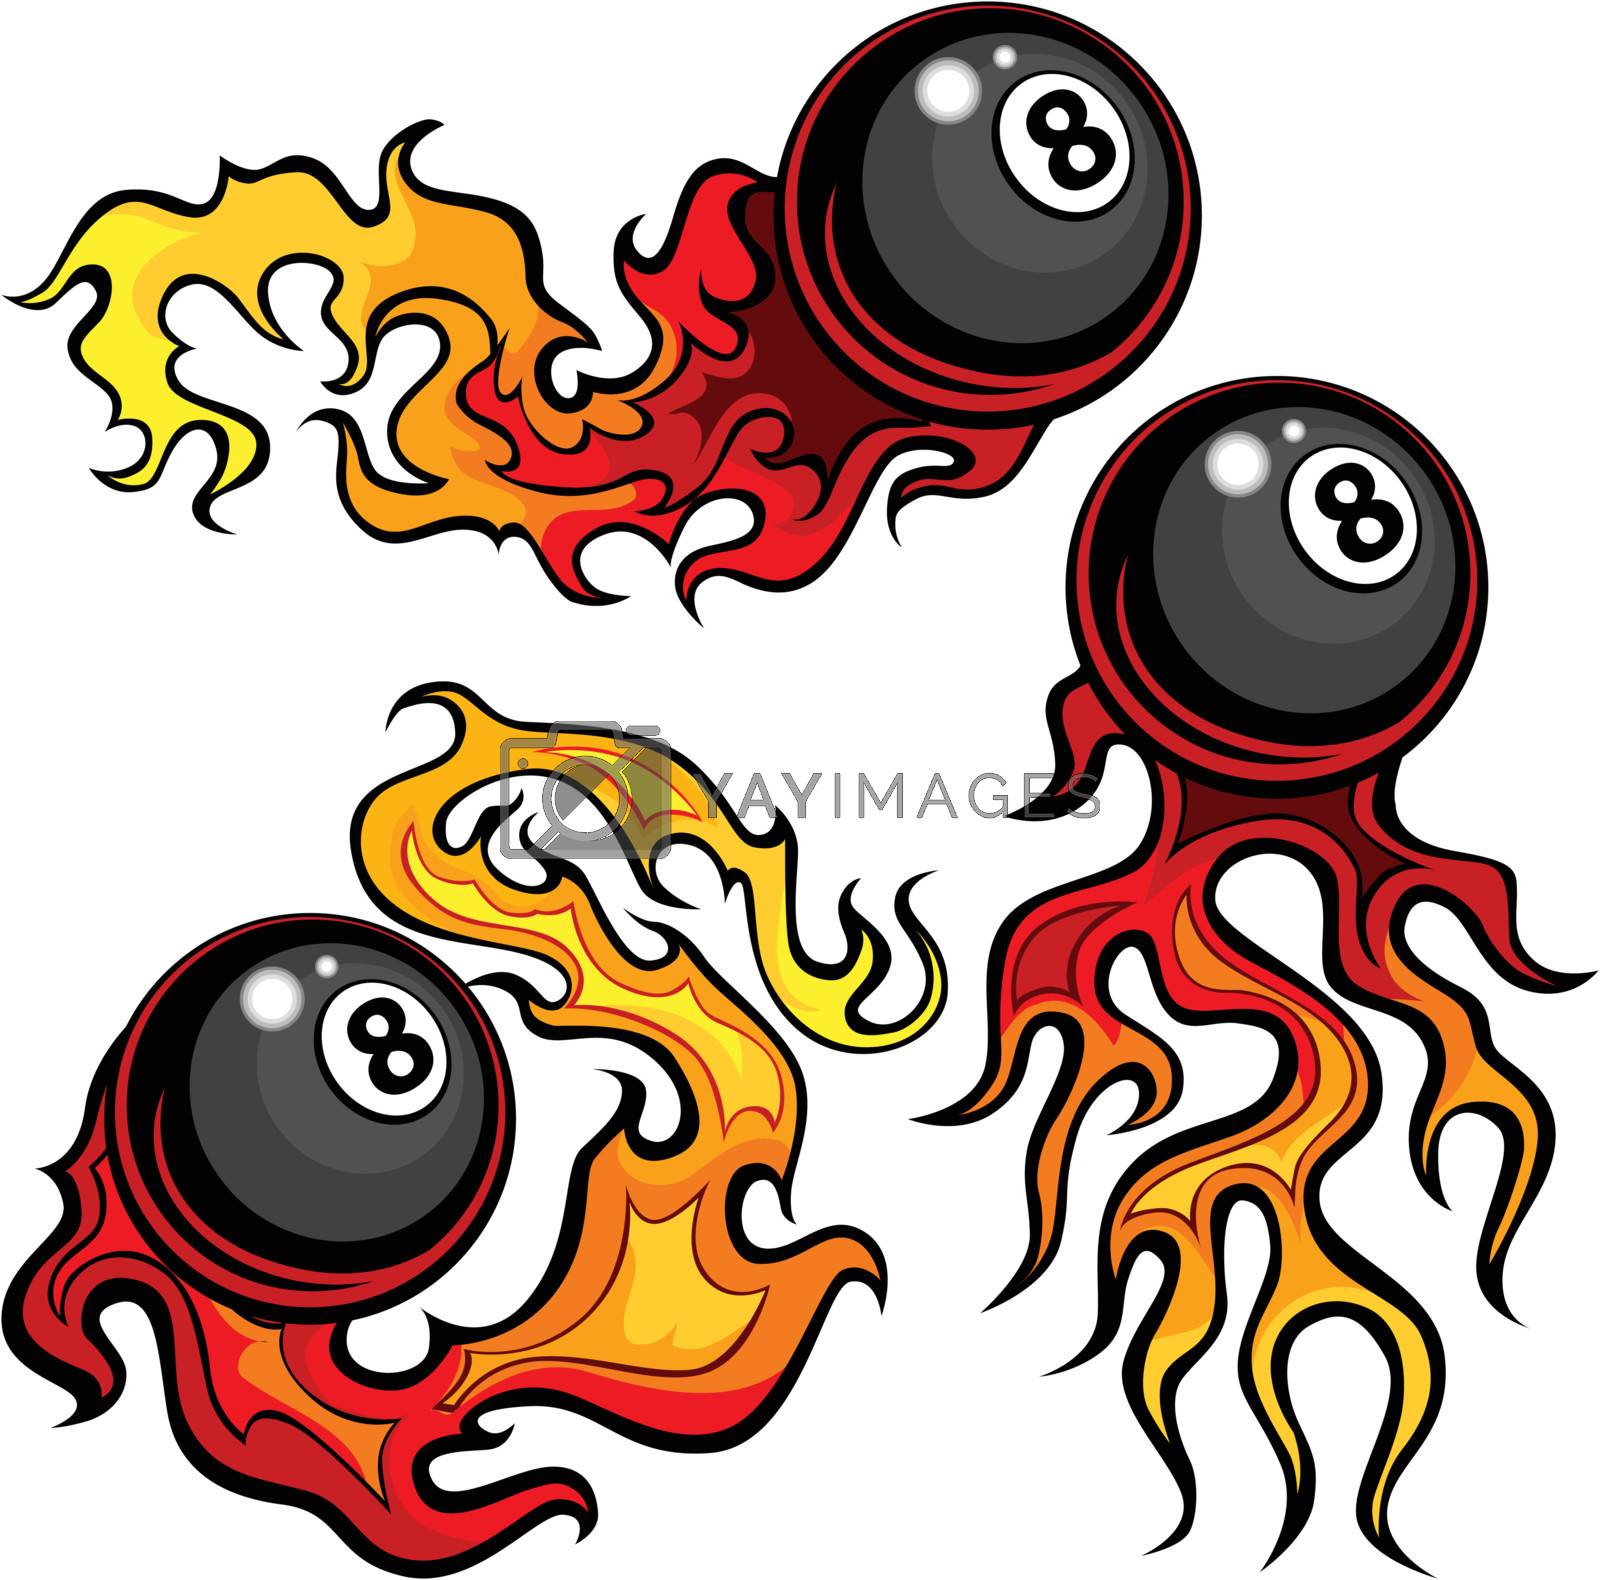 Royalty free image of Billiards Eight Ball Flaming Vector Design Template by chromaco